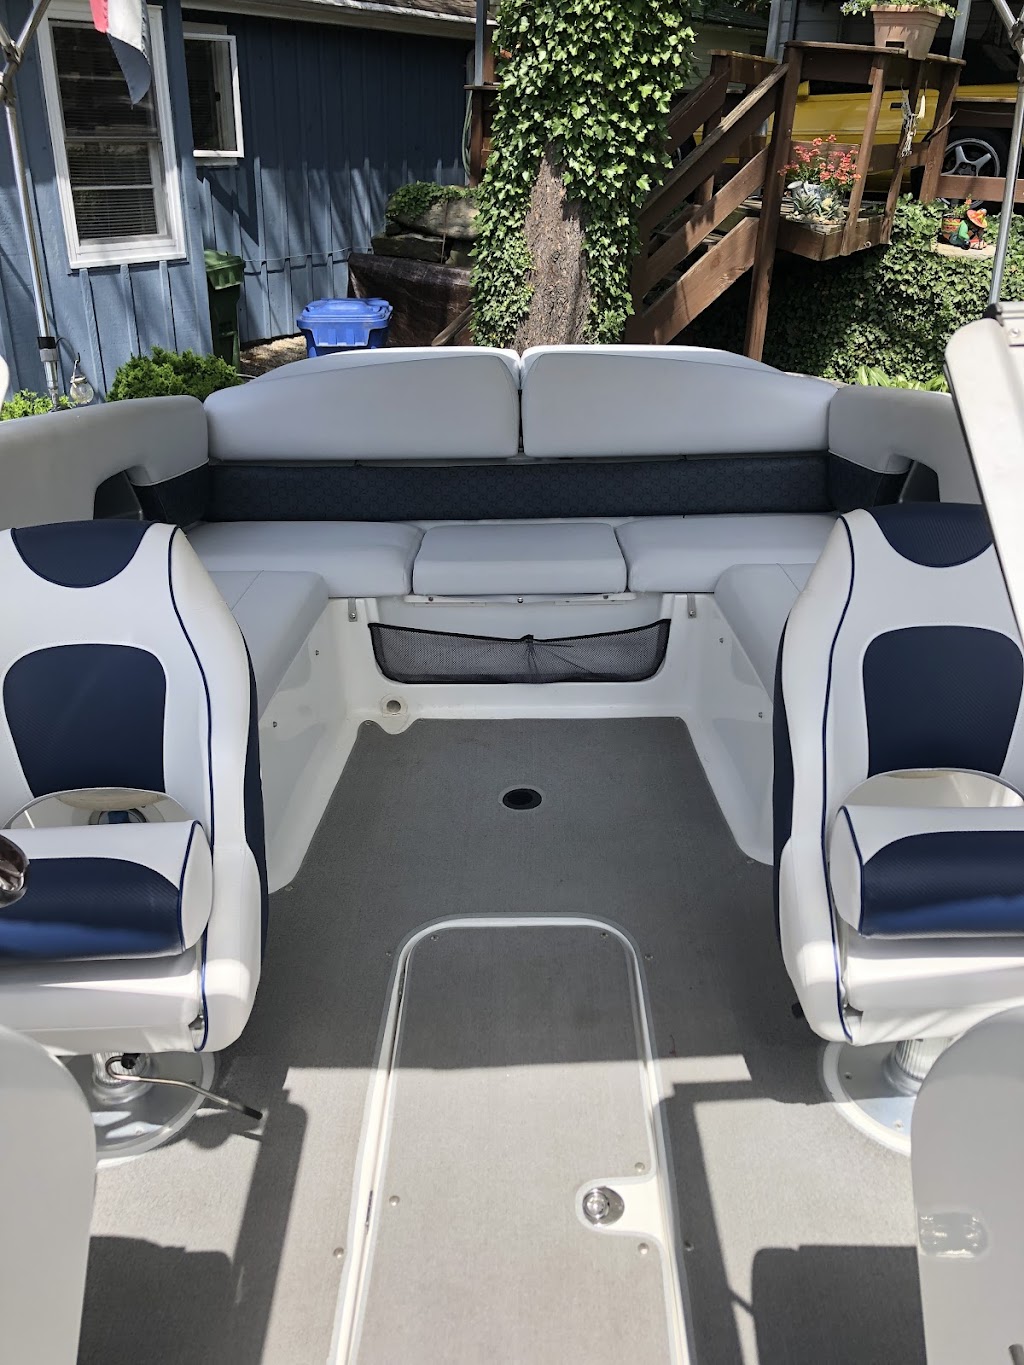 Precision Upholstery And Boat Canvas | 1 Fairview Rd, Higganum, CT 06441 | Phone: (860) 778-3330